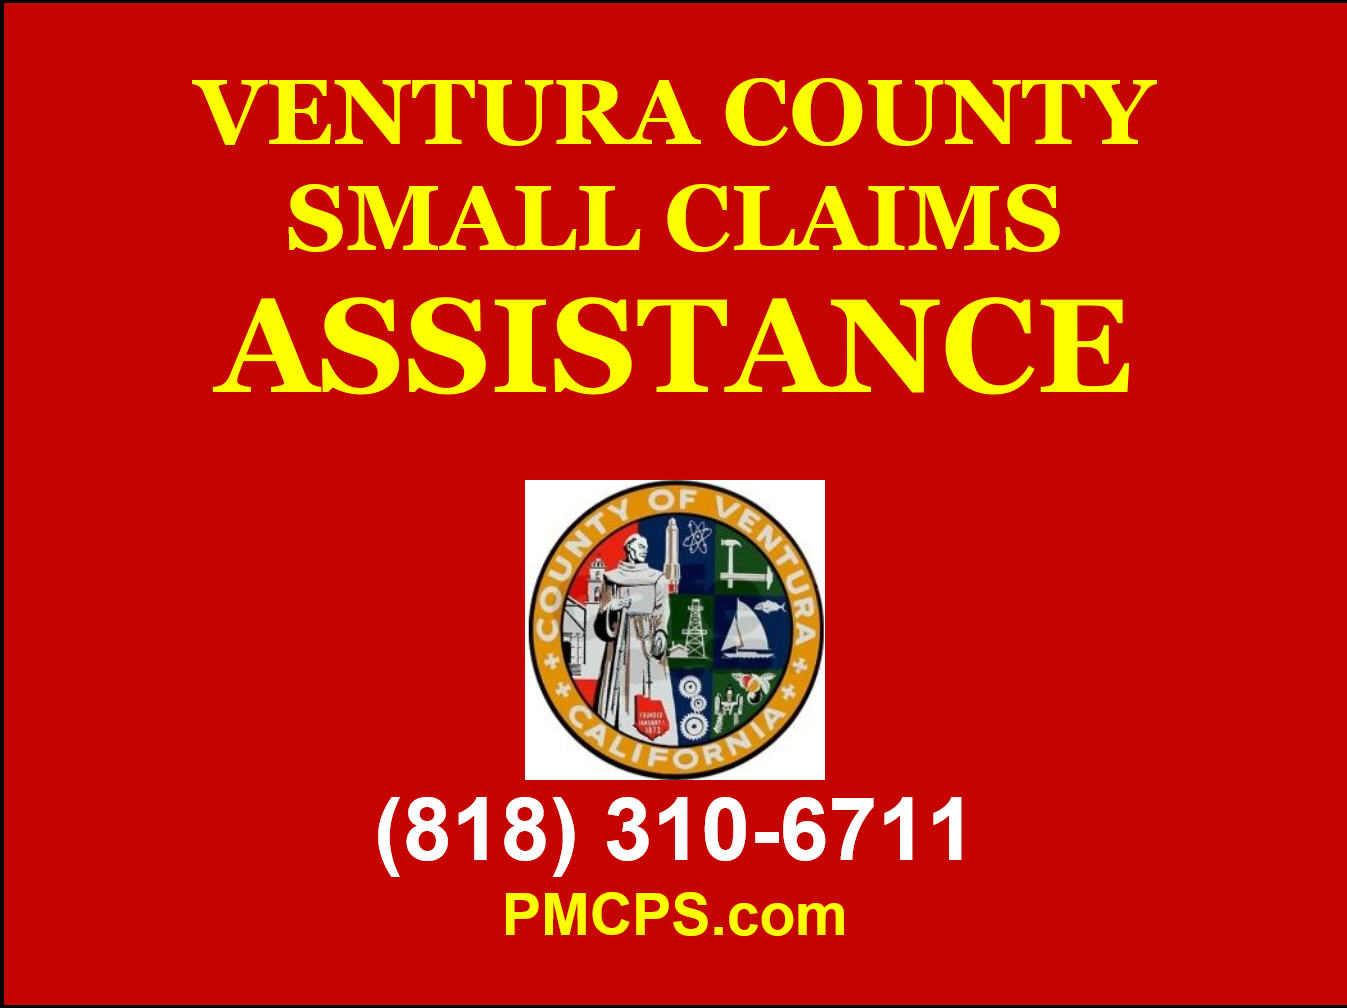 Ventura County Small Claims Assistance